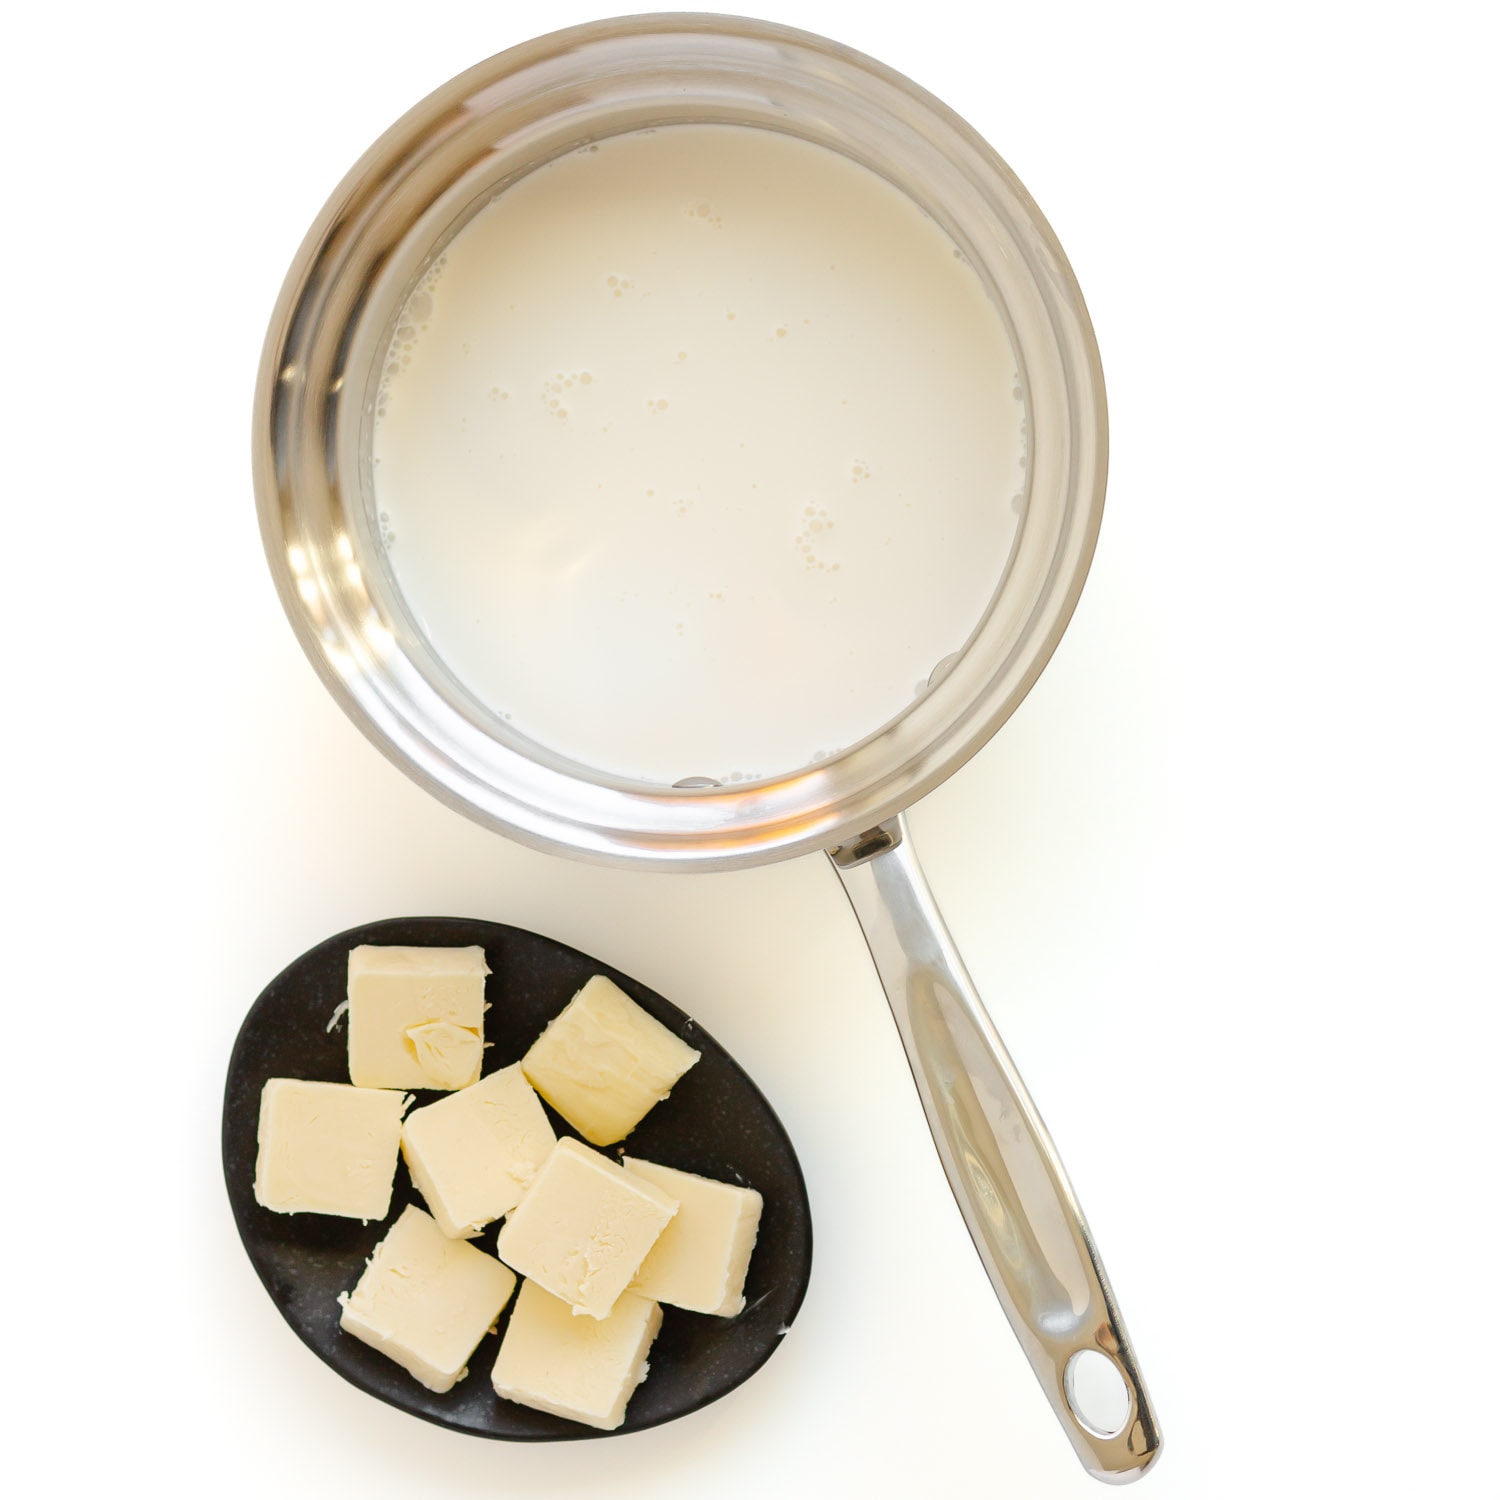 Cream in a small saucepan and diced up butter on small black dish.